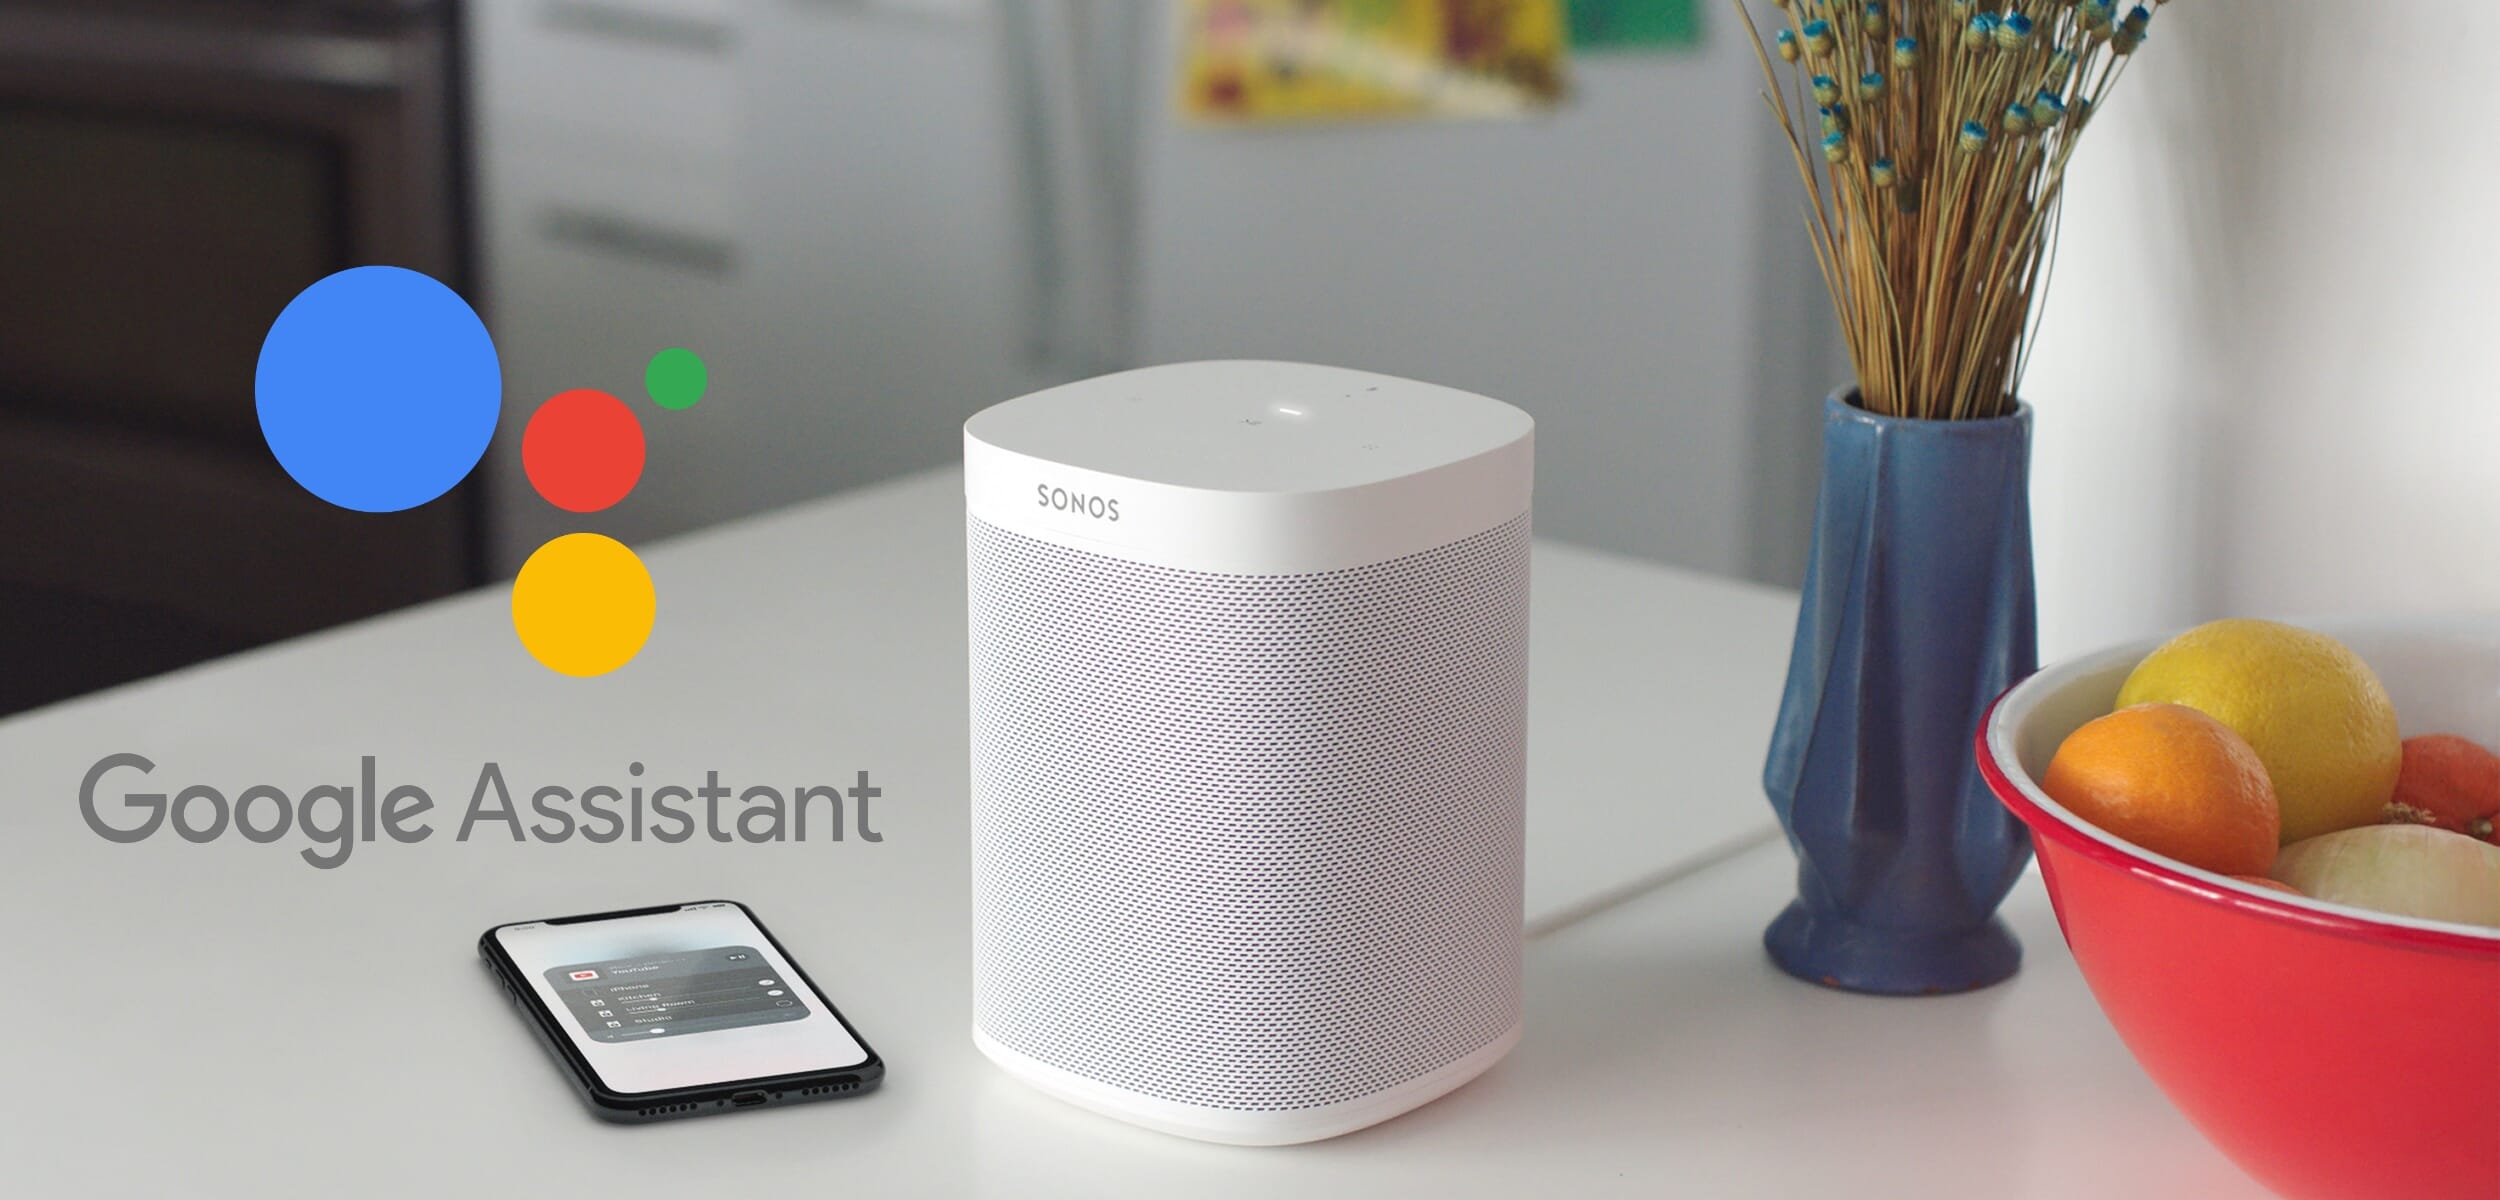 whisky Mening parkere Google Assistant has landed on Sonos in the UK | Smart Home Sounds